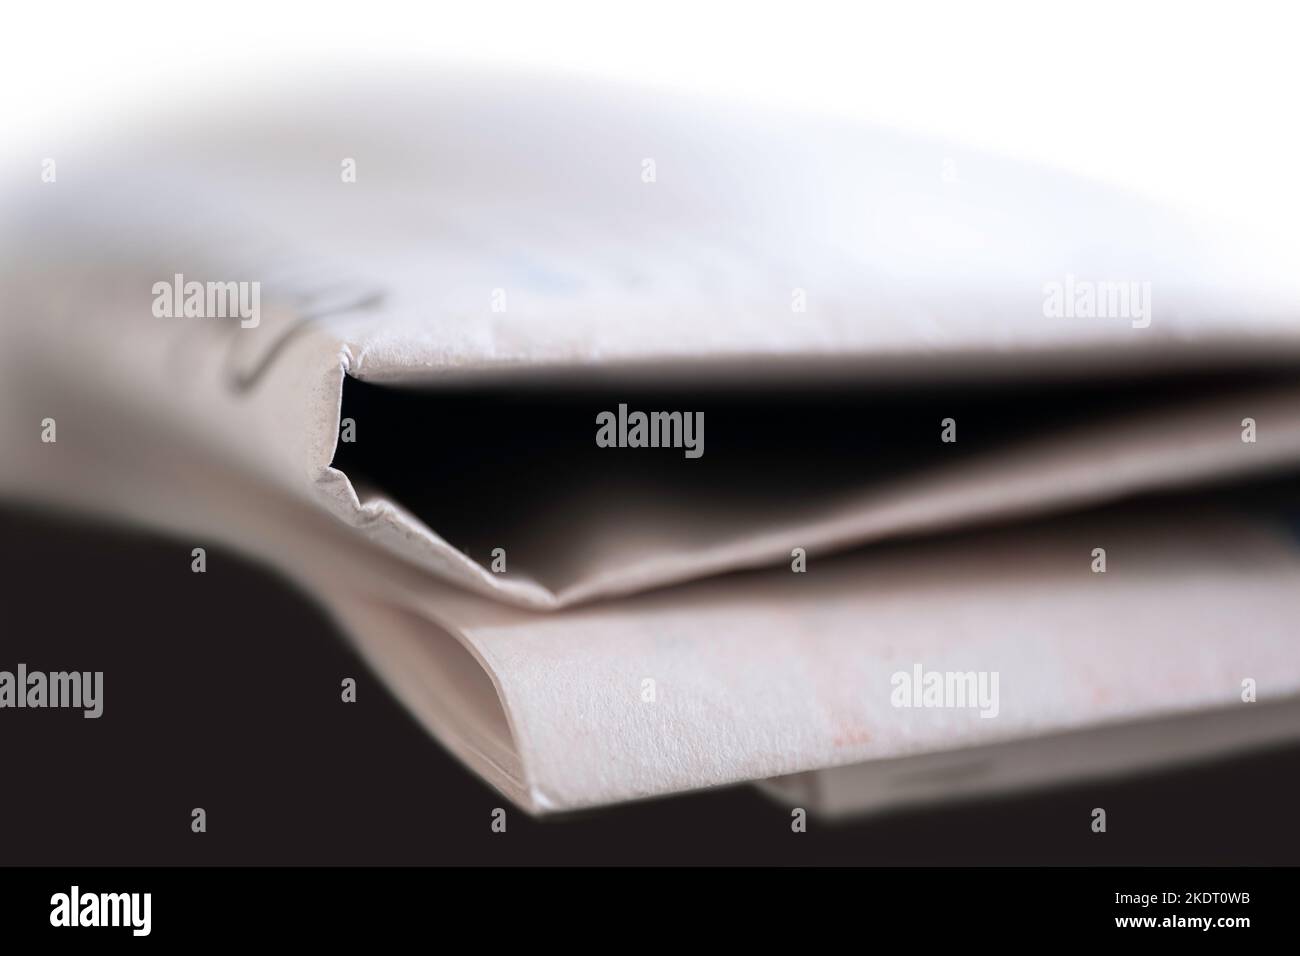 Folded newspaper on a black table with narrow depth of field Stock Photo